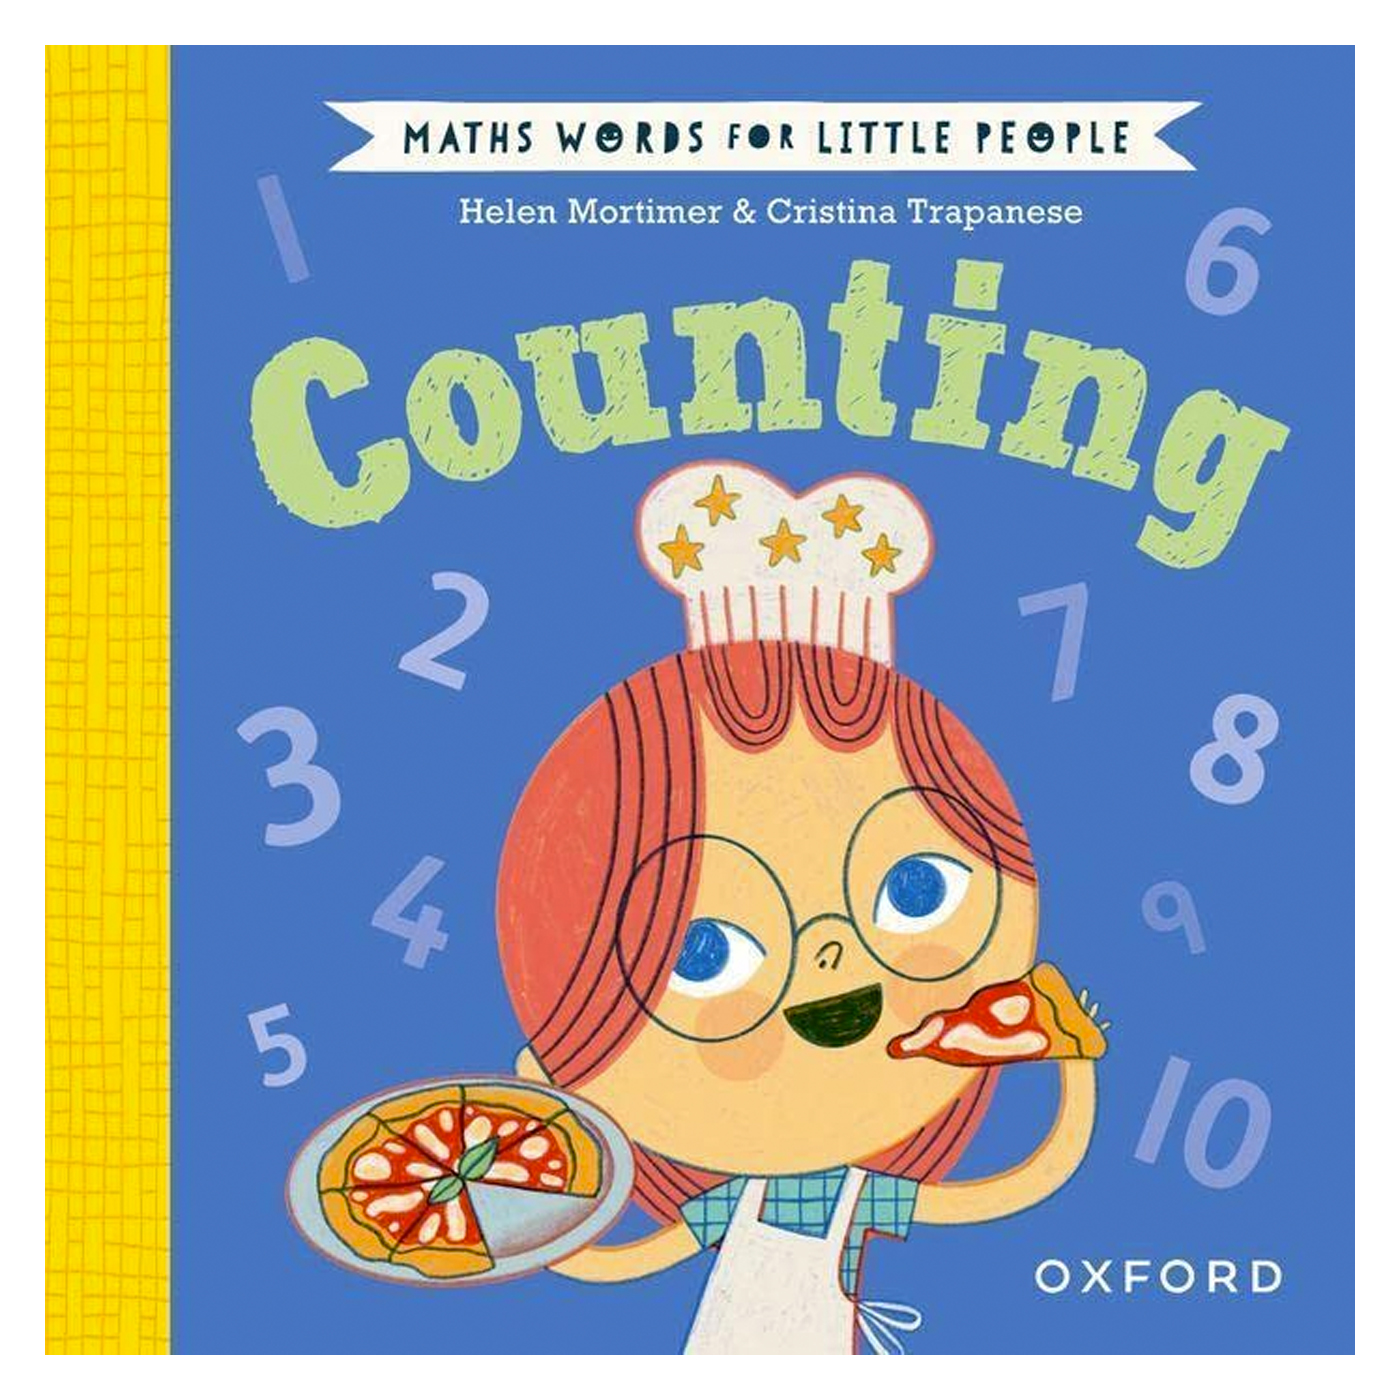 OXFORD CHILDRENS BOOK Maths Words For Little People: Counting